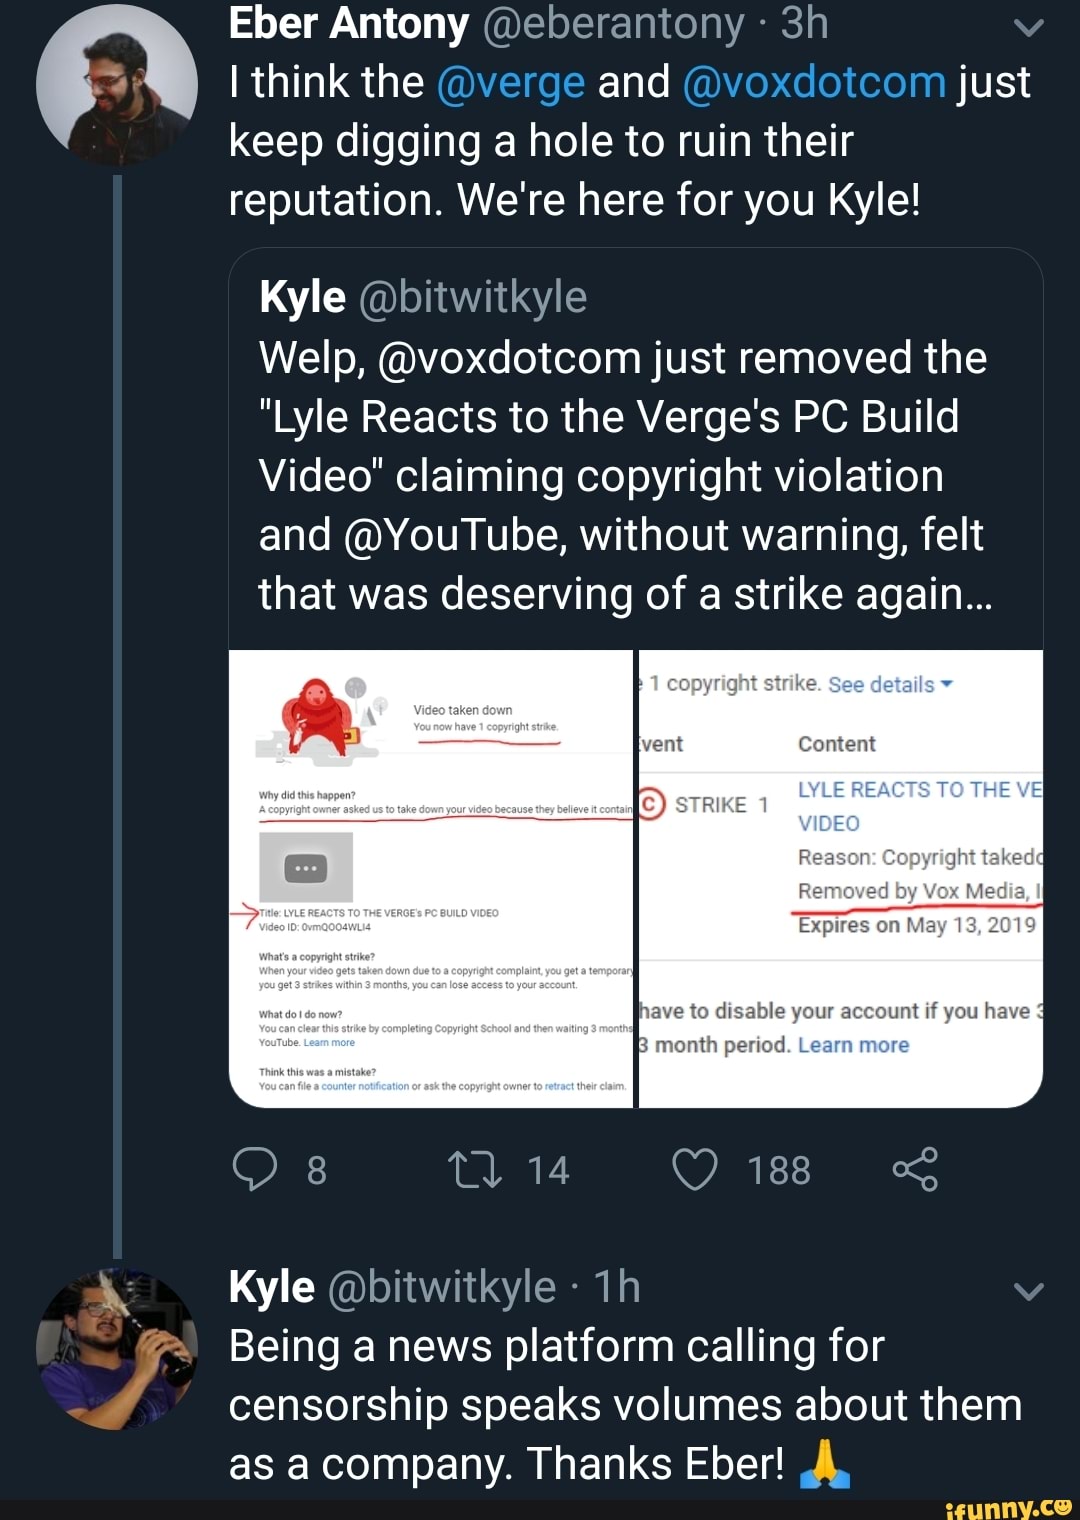 Welp, @voxdotcom just removed the "Lyle Reacts to the Verge's PC Build Video"  claiming copyright violation and @YouTube, without warning, felt that was  deserving of a strike again... - )